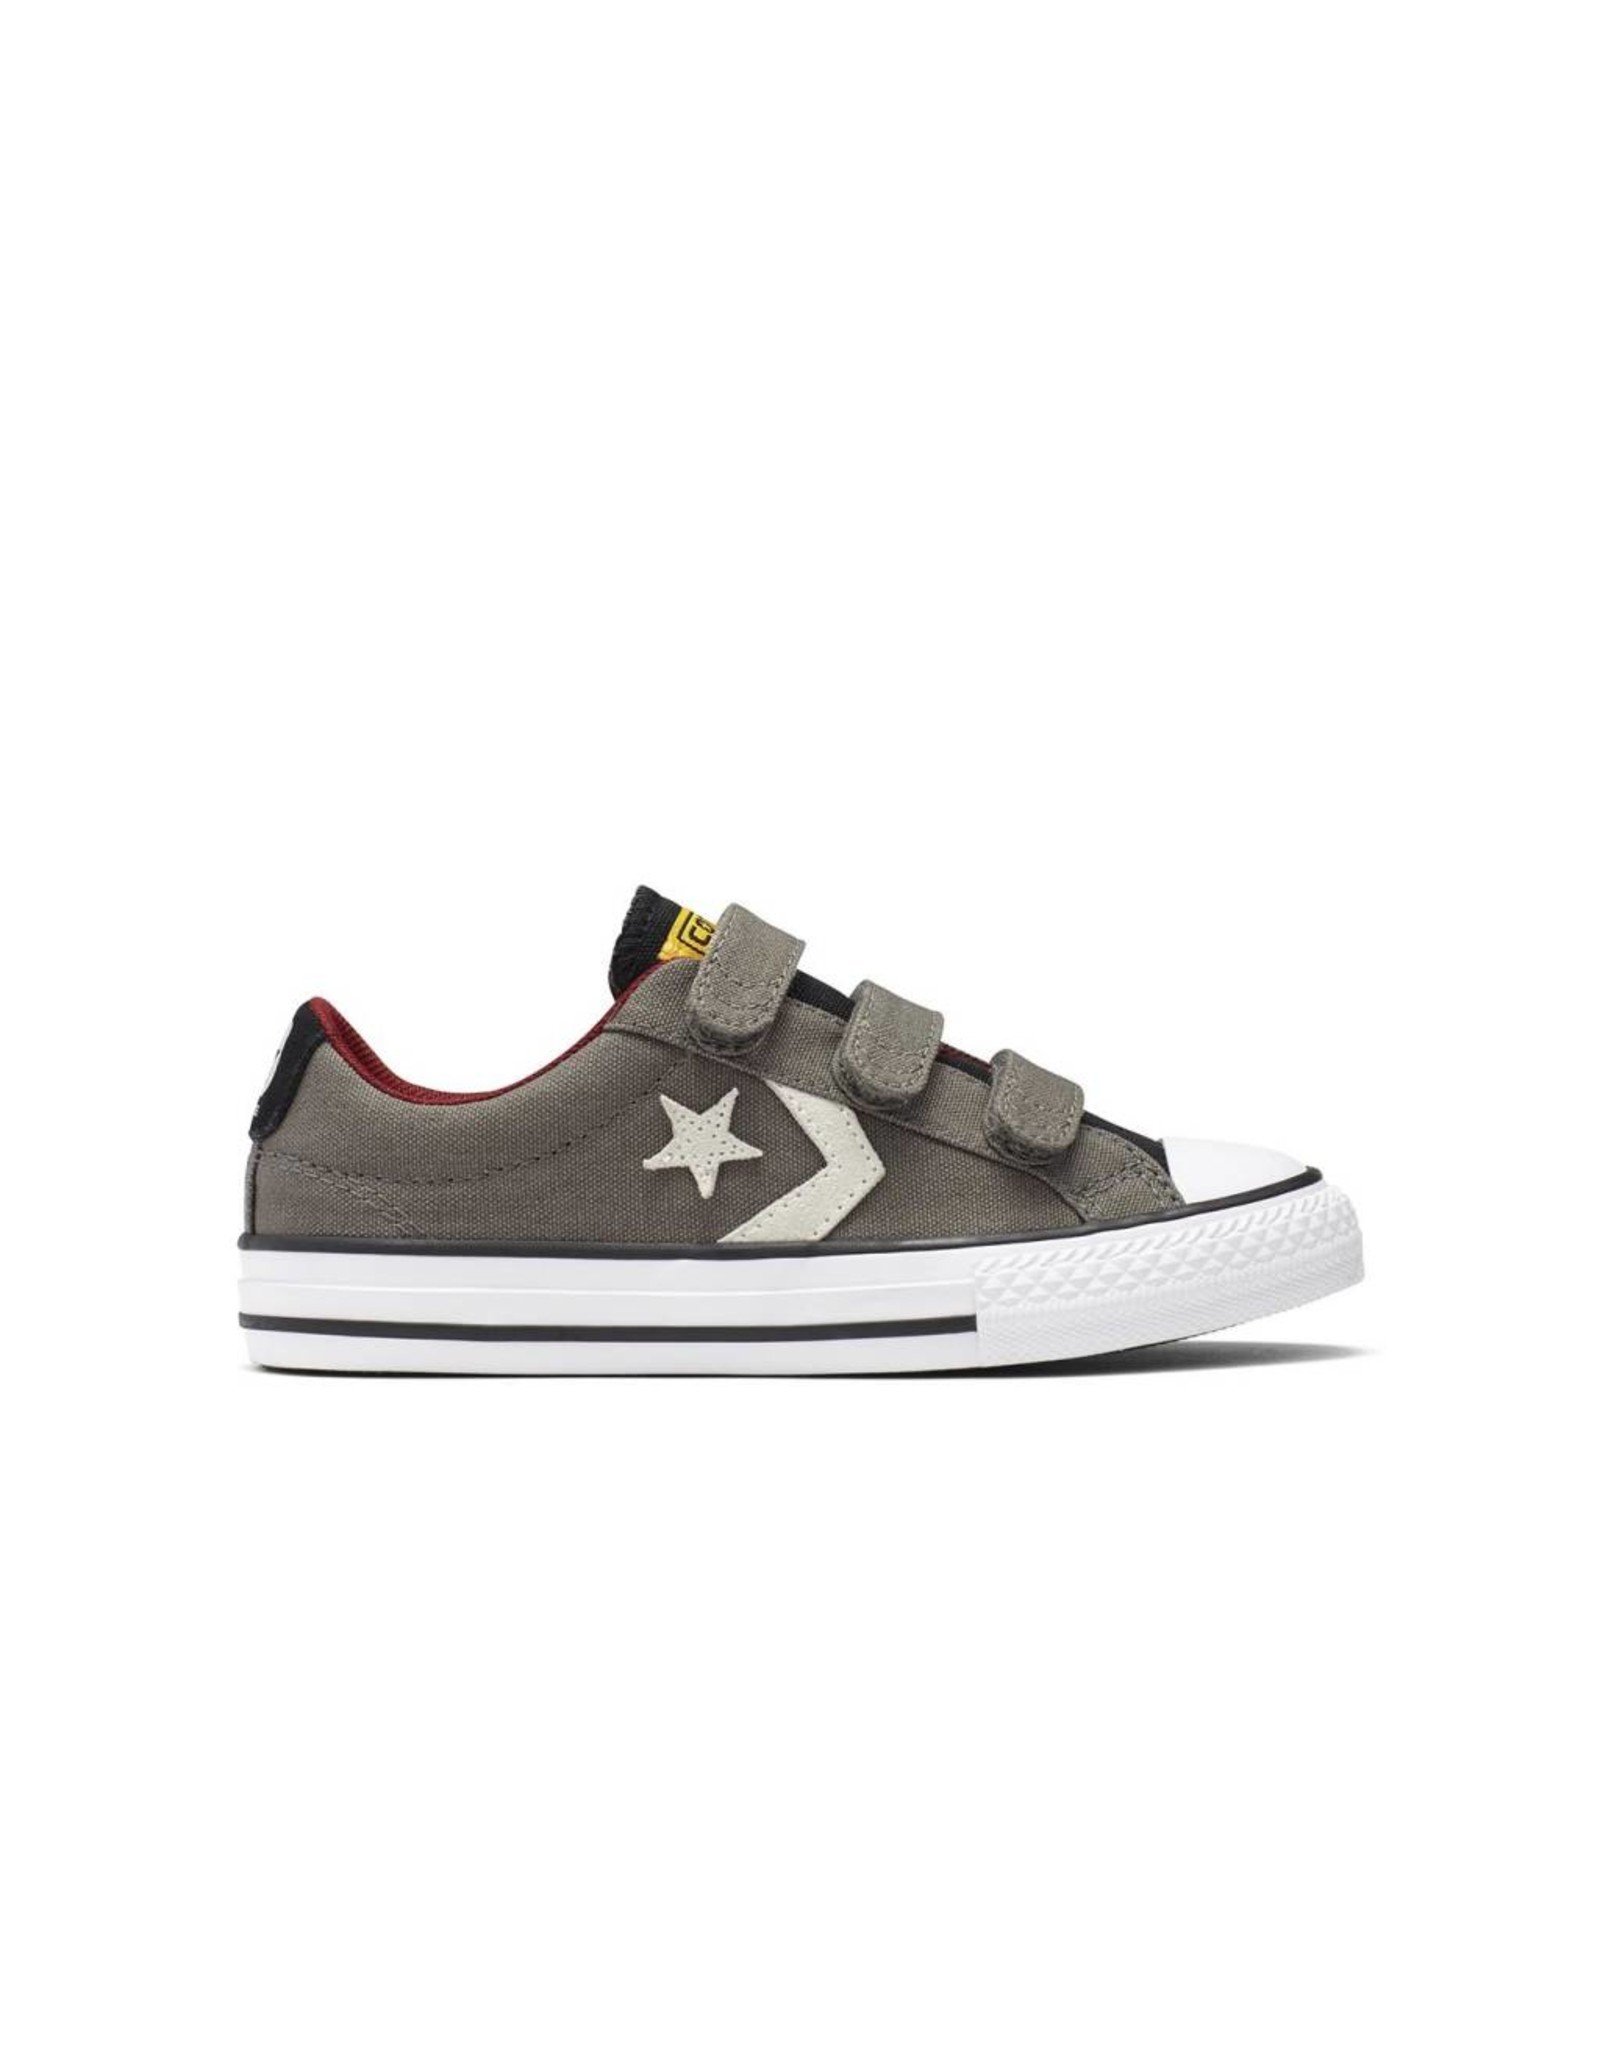 converse star player ox charcoal